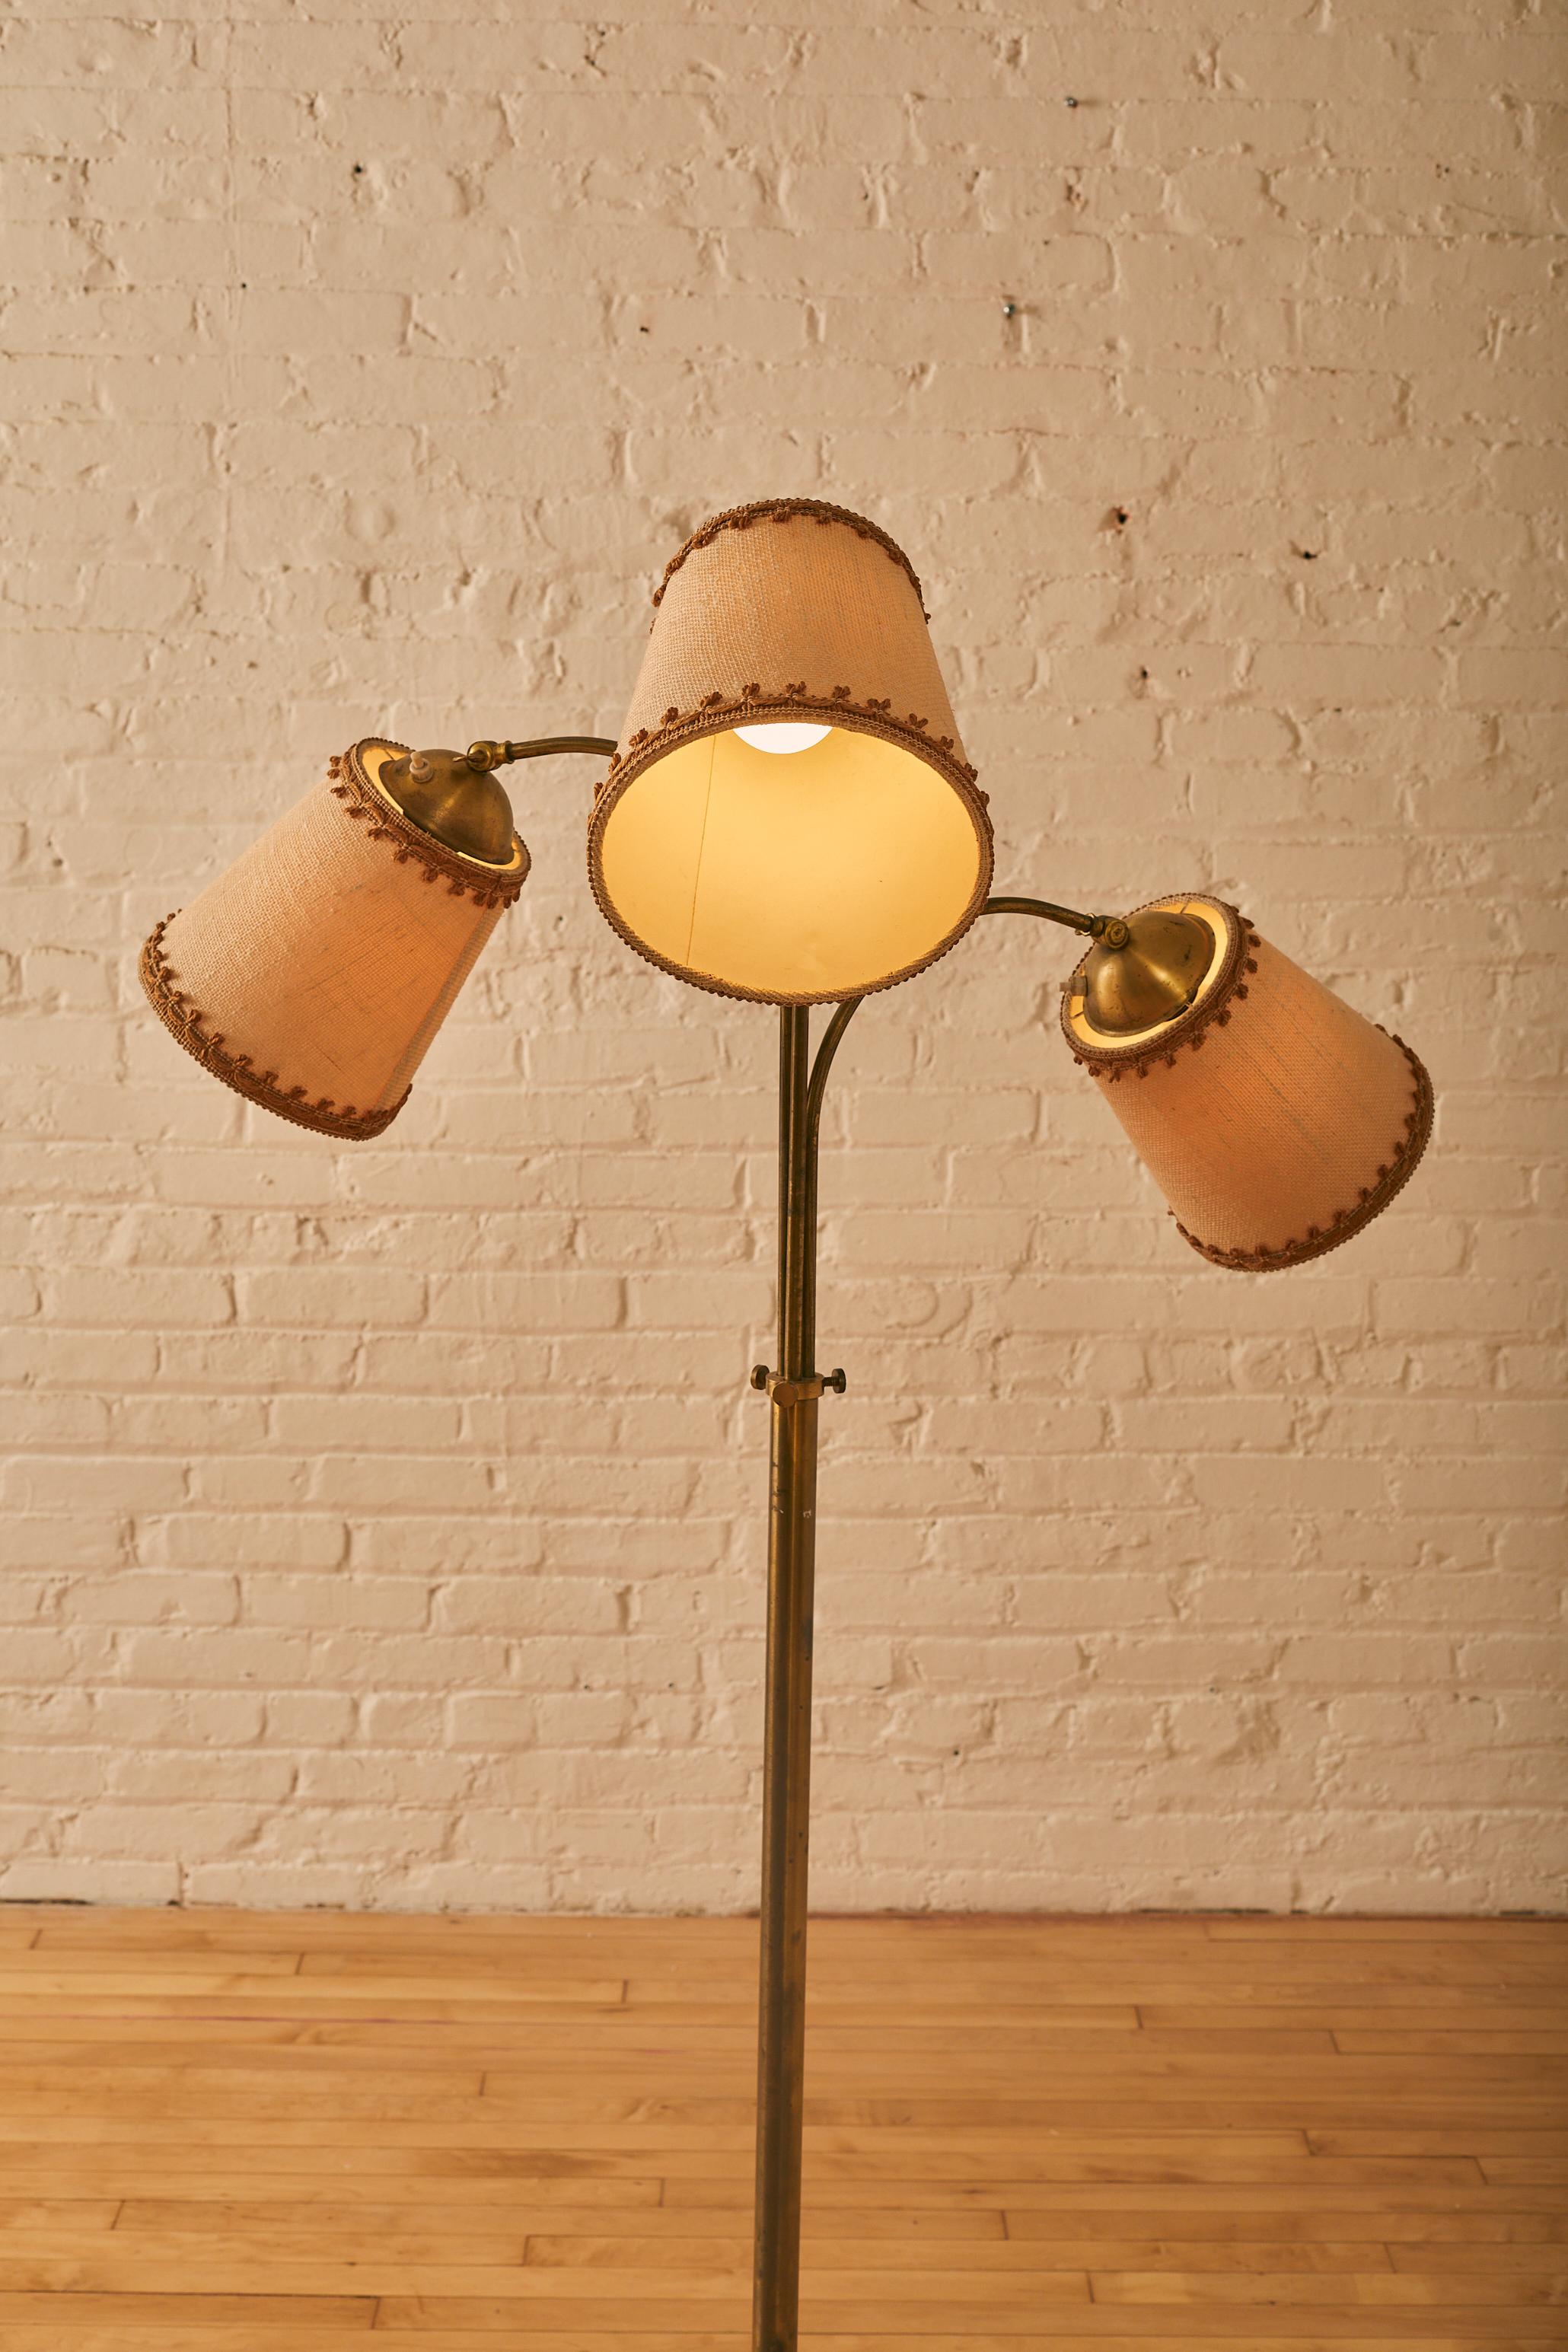 Three-Armed Functionalist Floor Lamp with adjustable arms and Swedish made lampshades.